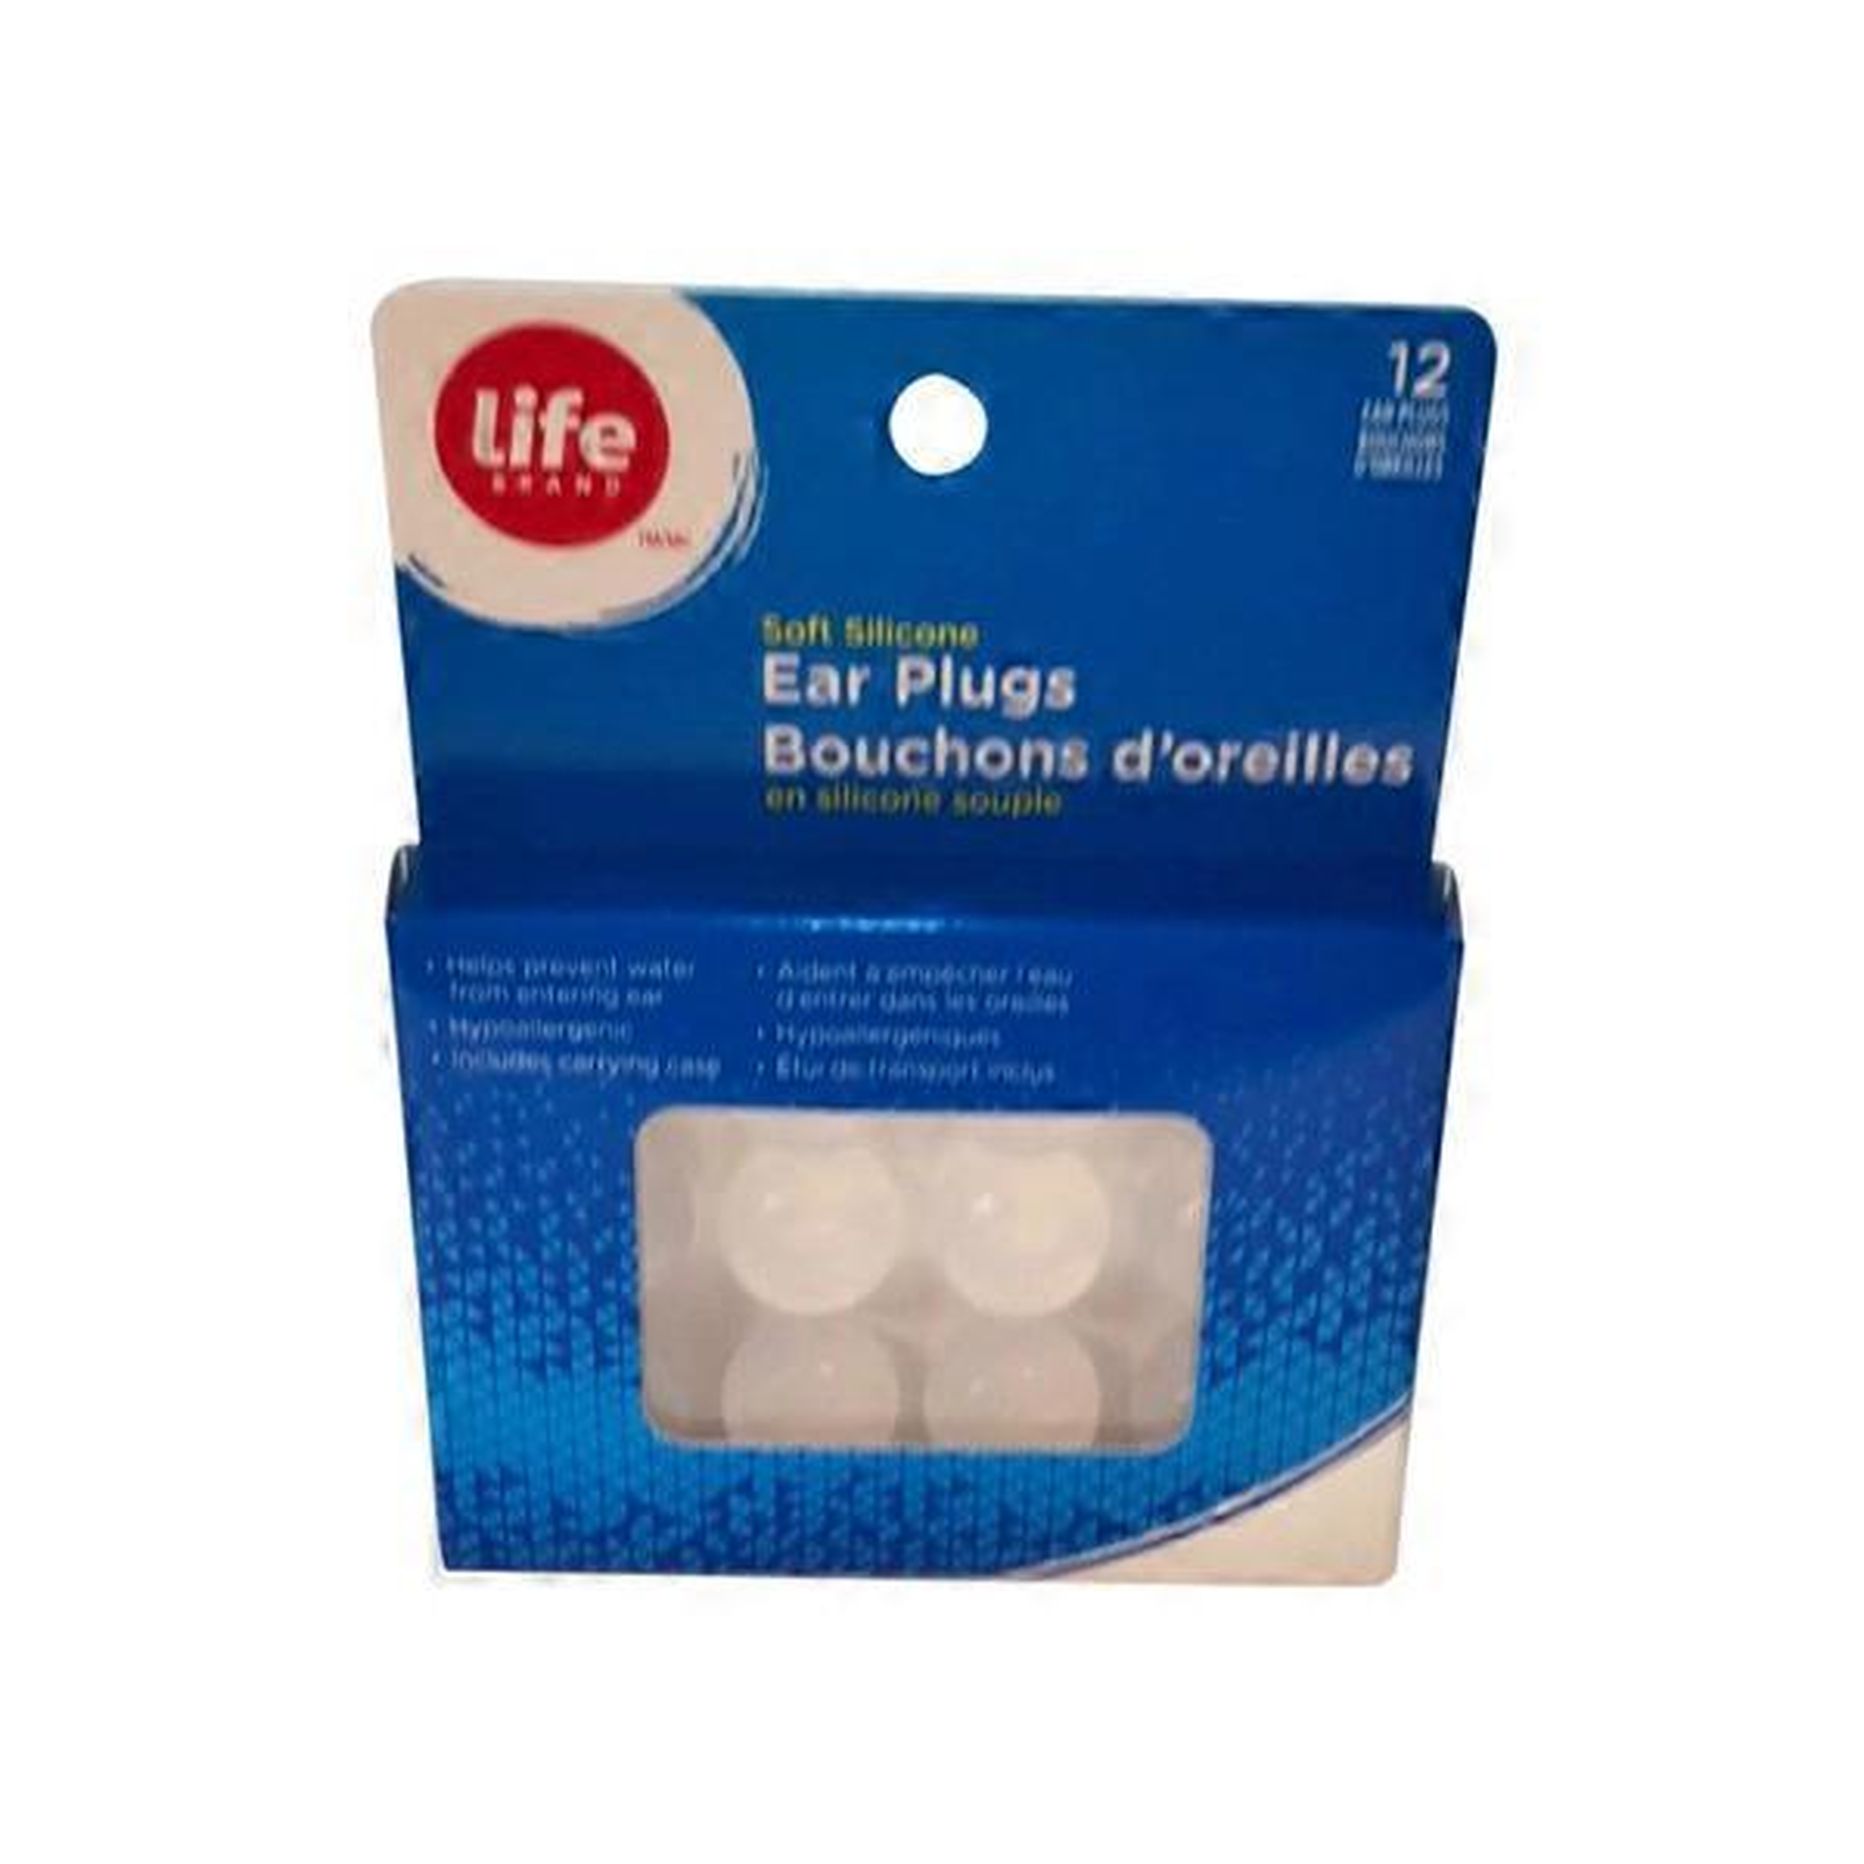 life-brand-soft-silicone-ear-plugs-12-ct-delivery-or-pickup-near-me